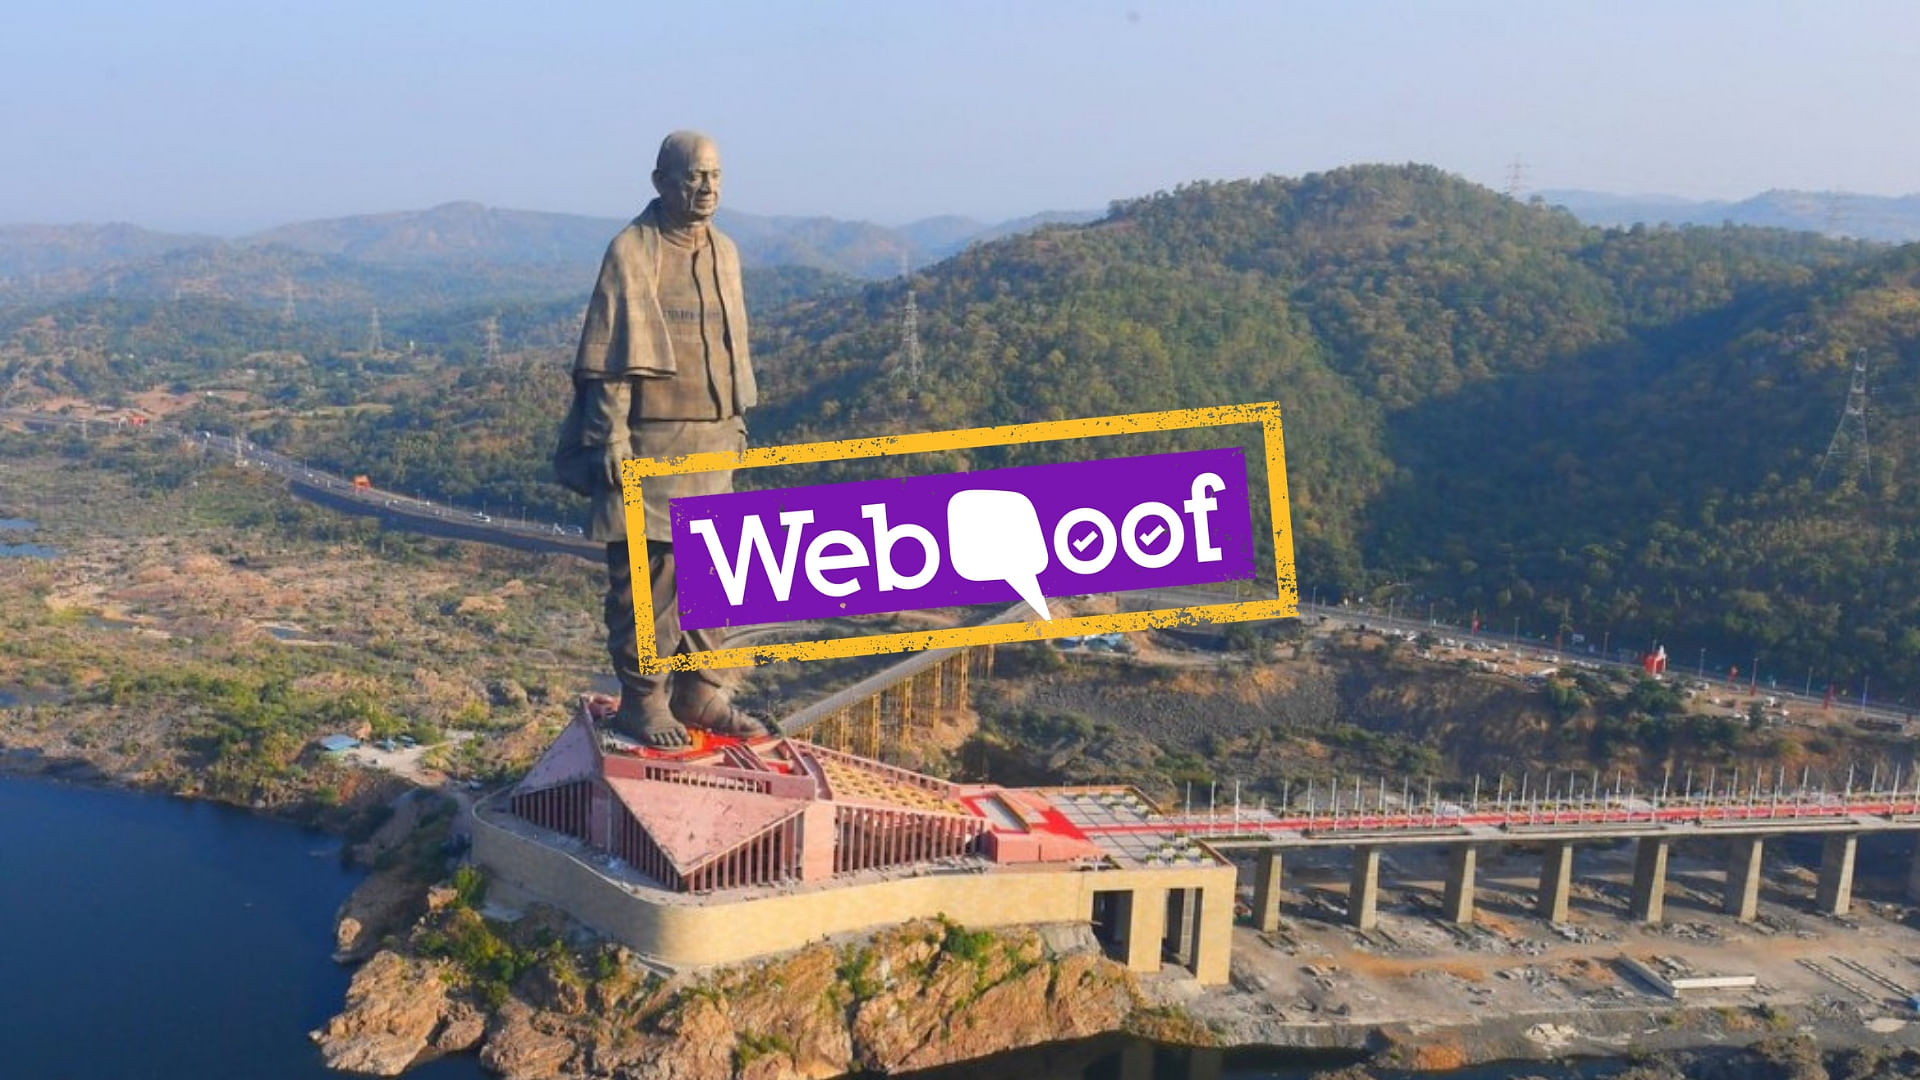 Many social media posts claim that PSUs paid Rs 2,500 crore for the Statue of Unity out of their CSR funds.&nbsp;